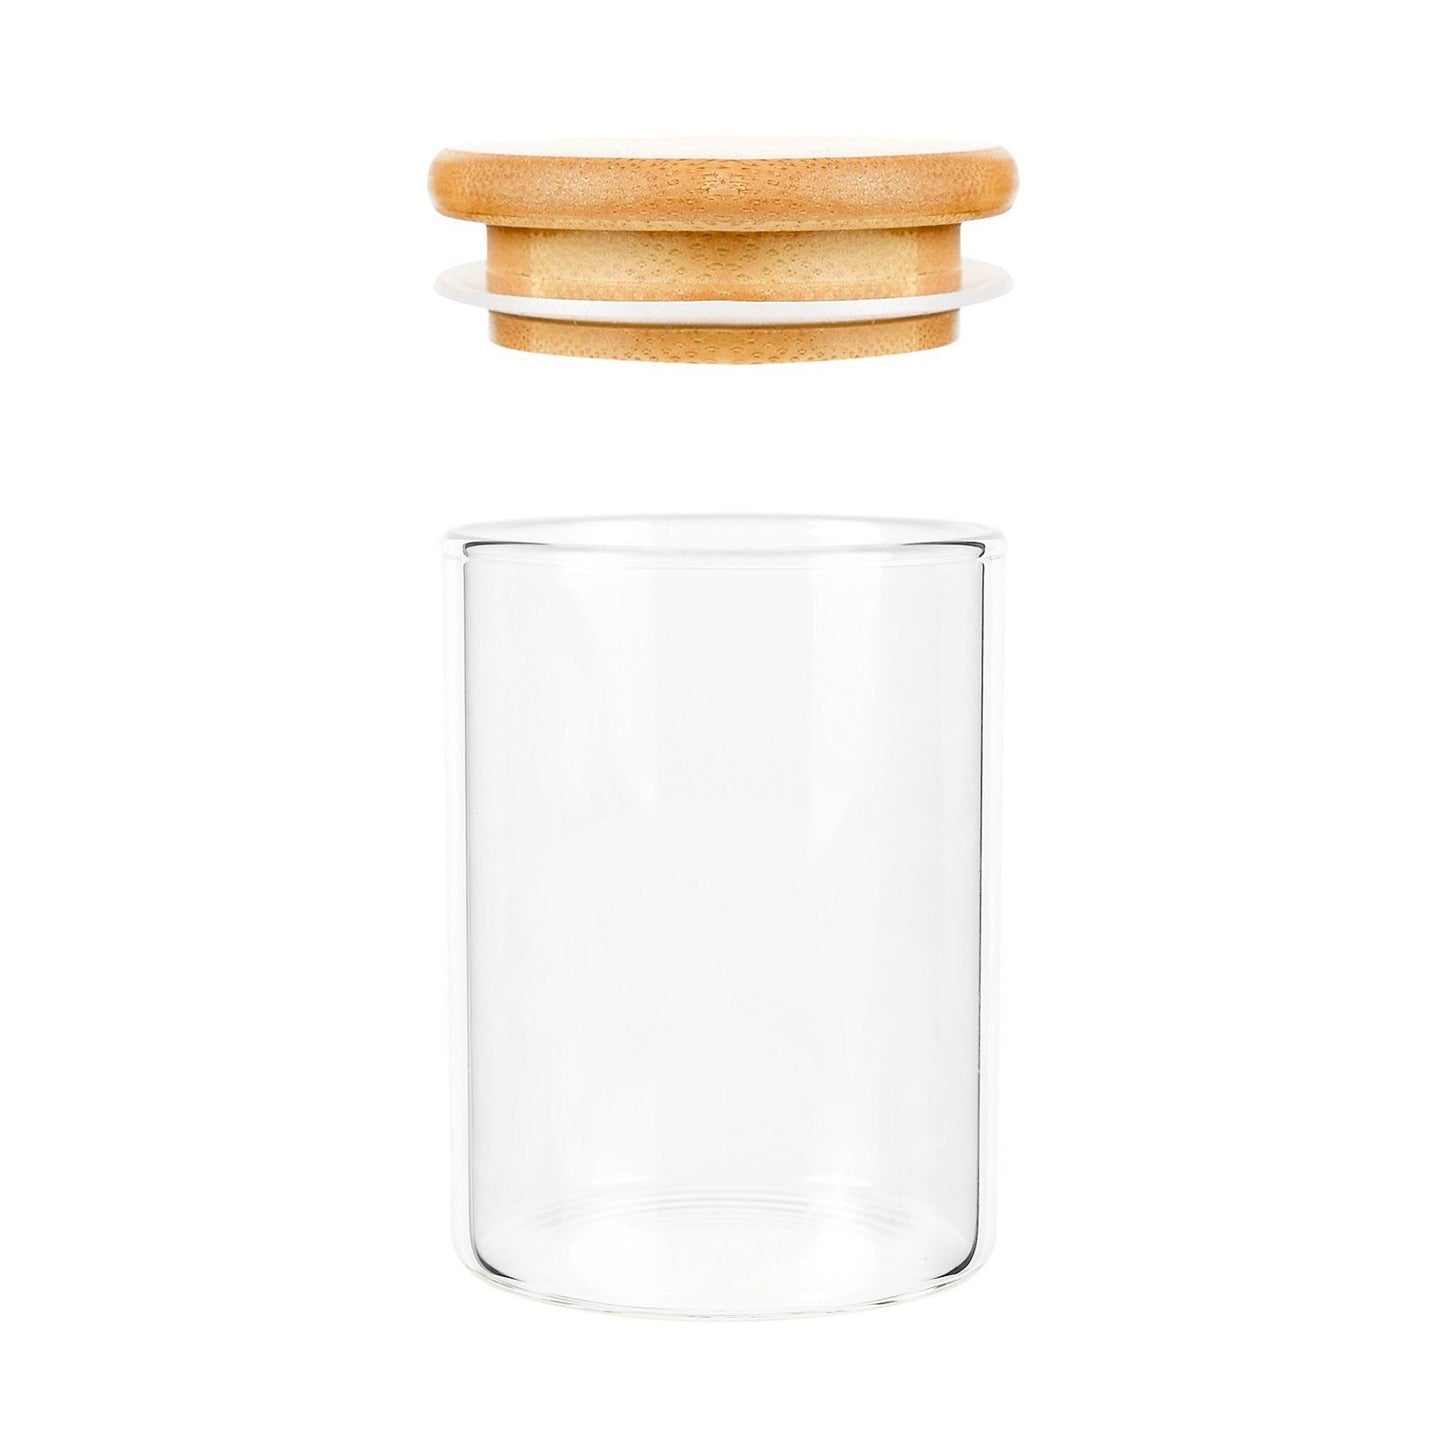 2oz Wood Lid Suction Glass Jars - 3.5 Grams 200 Count at Flower Power Packages